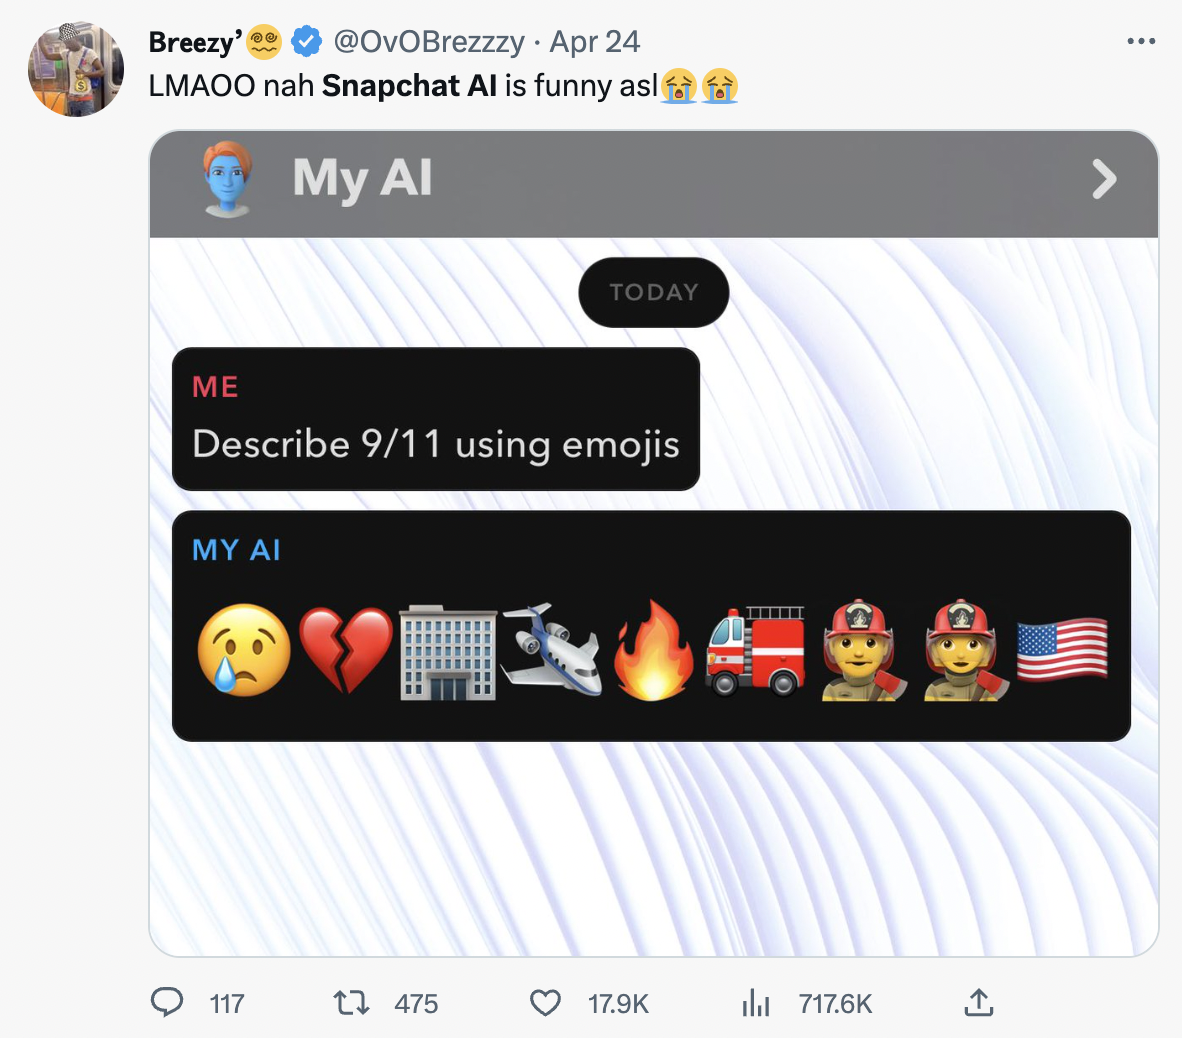 Unhinged My AI - software - Breezy' . Apr 24 Lmaoo nah Snapchat Al is funny asl f My Al O Me Describe 911 using emojis My Ai 117 t 475 Today 3 ill